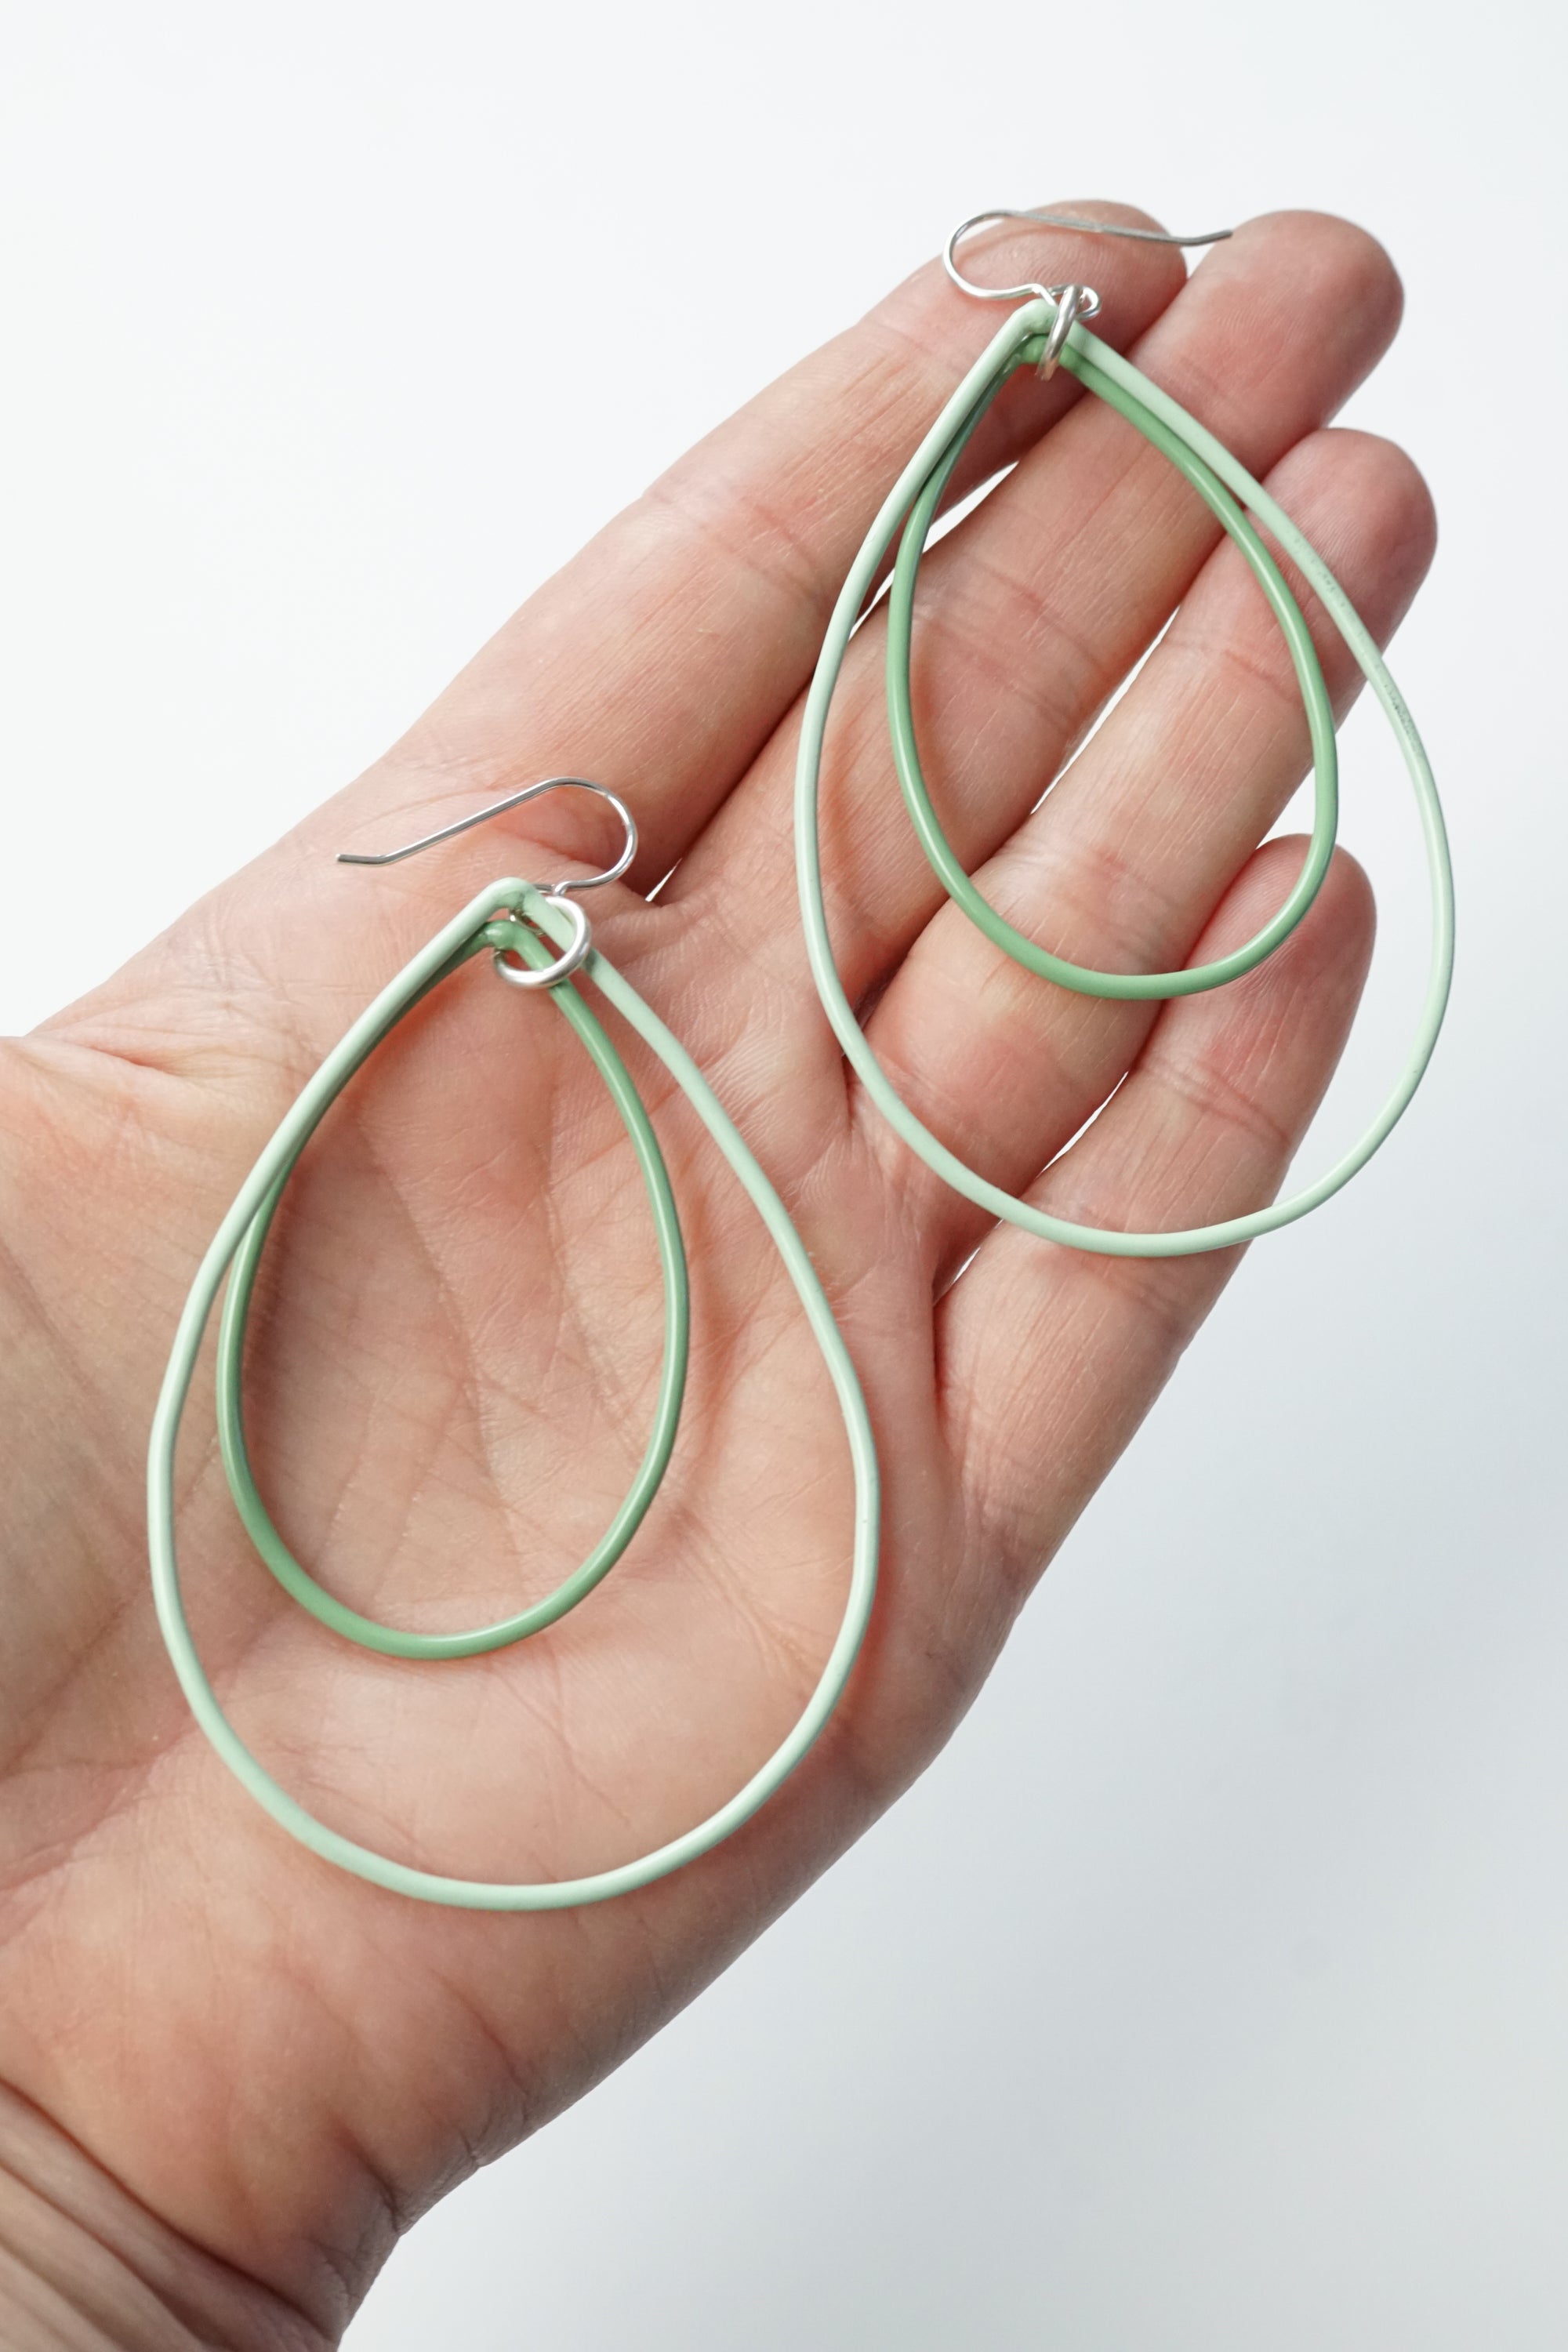 Large Eva earrings in Soft Mint and Pale Green